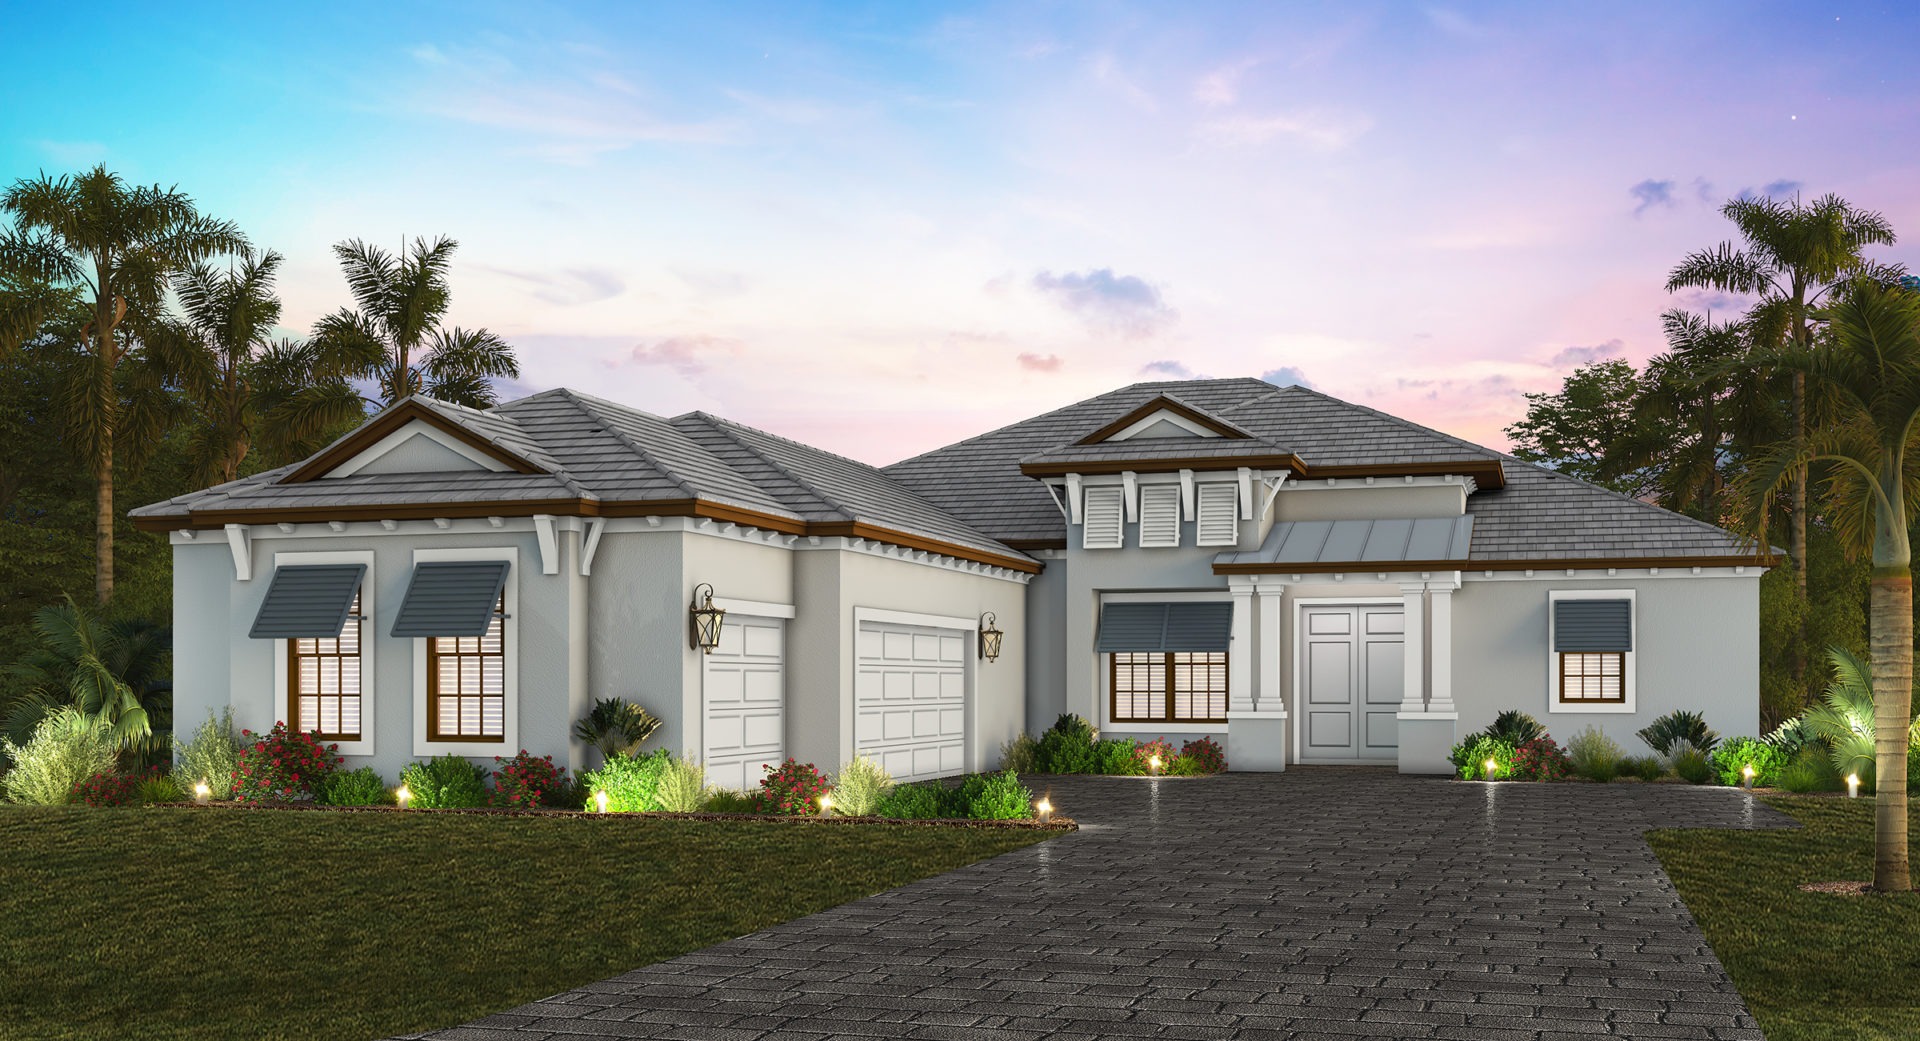 The Newport is one of the newest floorplans in the St. Lucia neighborhood